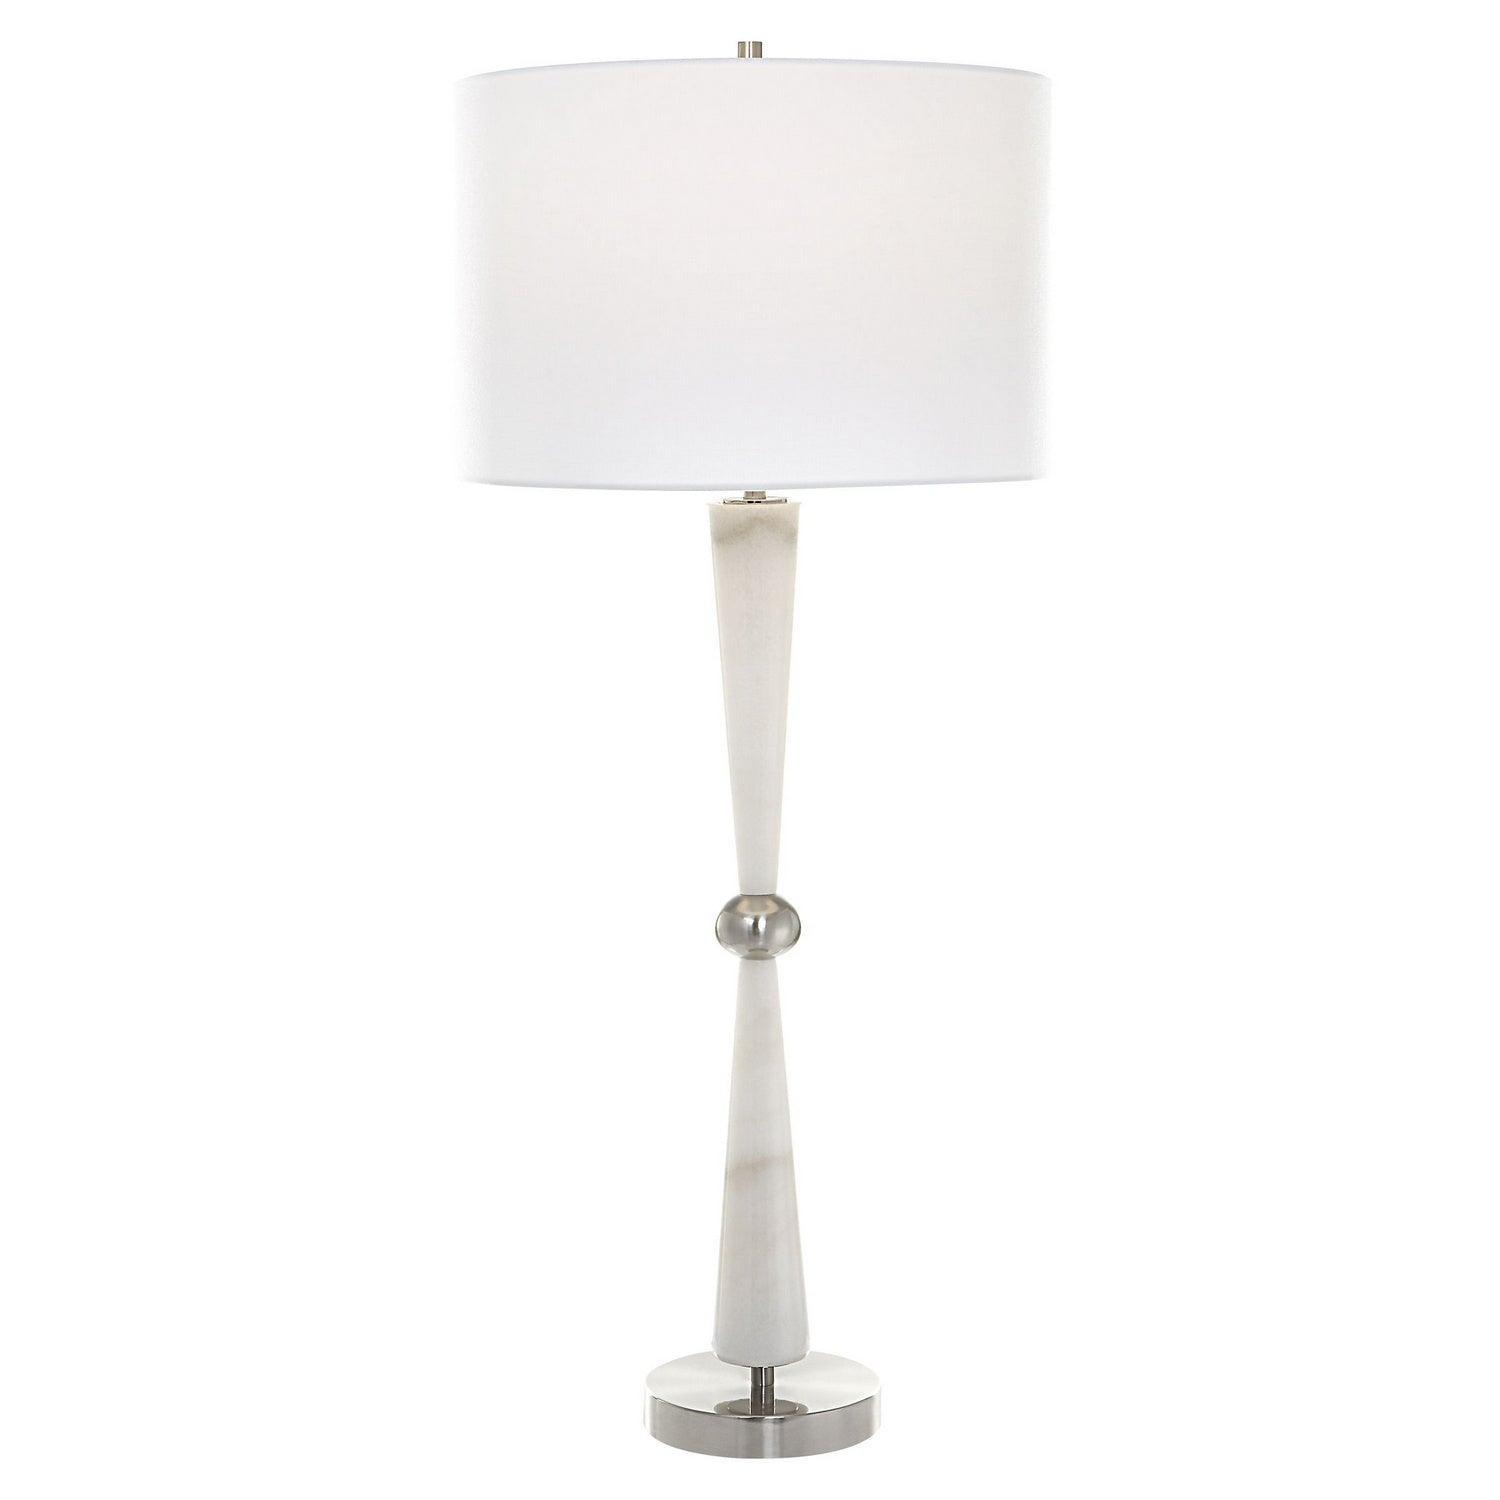 The Uttermost - Hourglass Table Lamp - 30064 | Montreal Lighting & Hardware